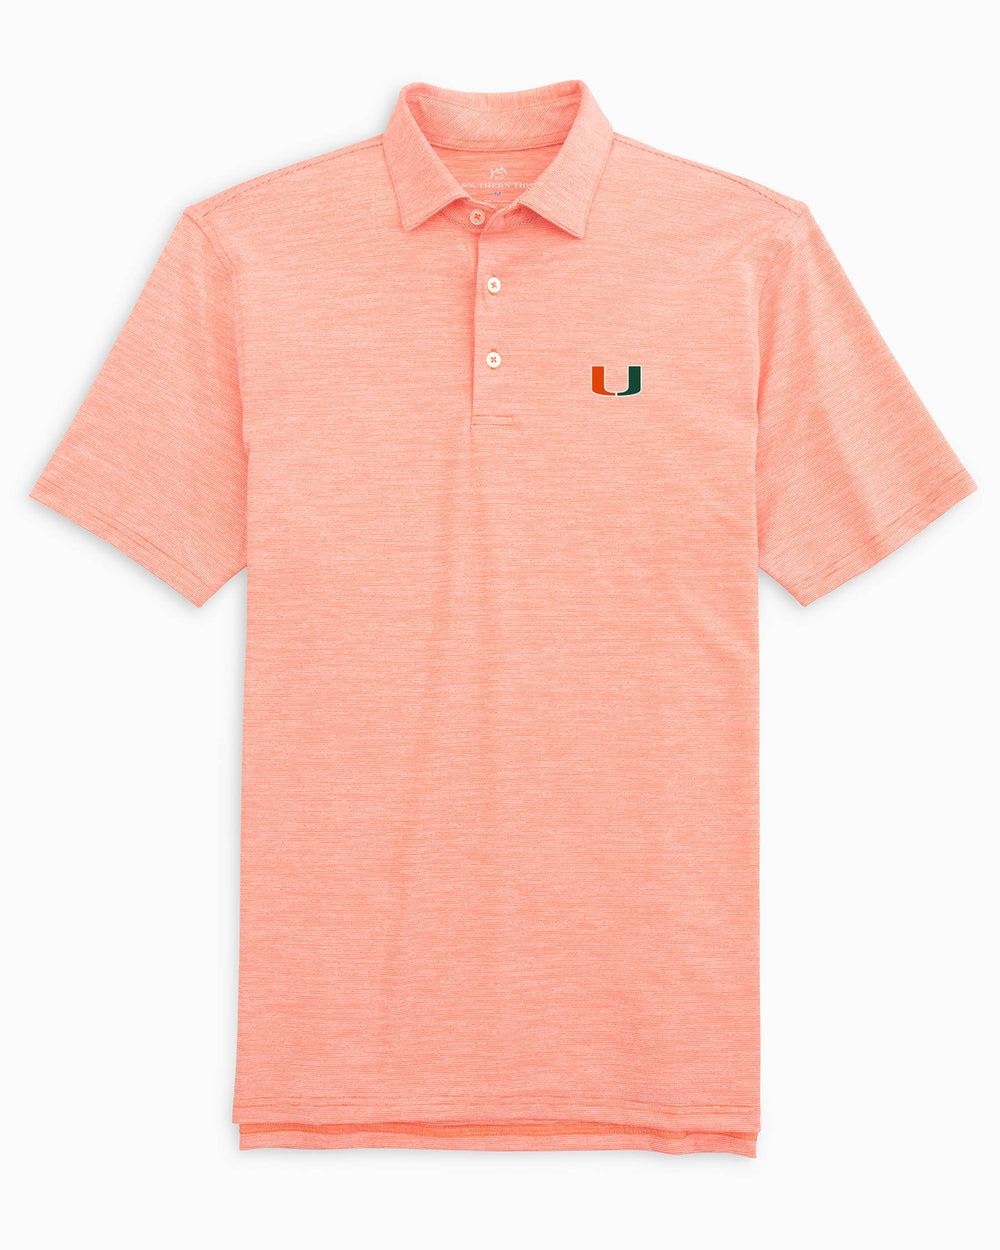 The front of the Men's Miami Hurricanes Driver Spacedye Polo Shirt by Southern Tide - Endzone Orange